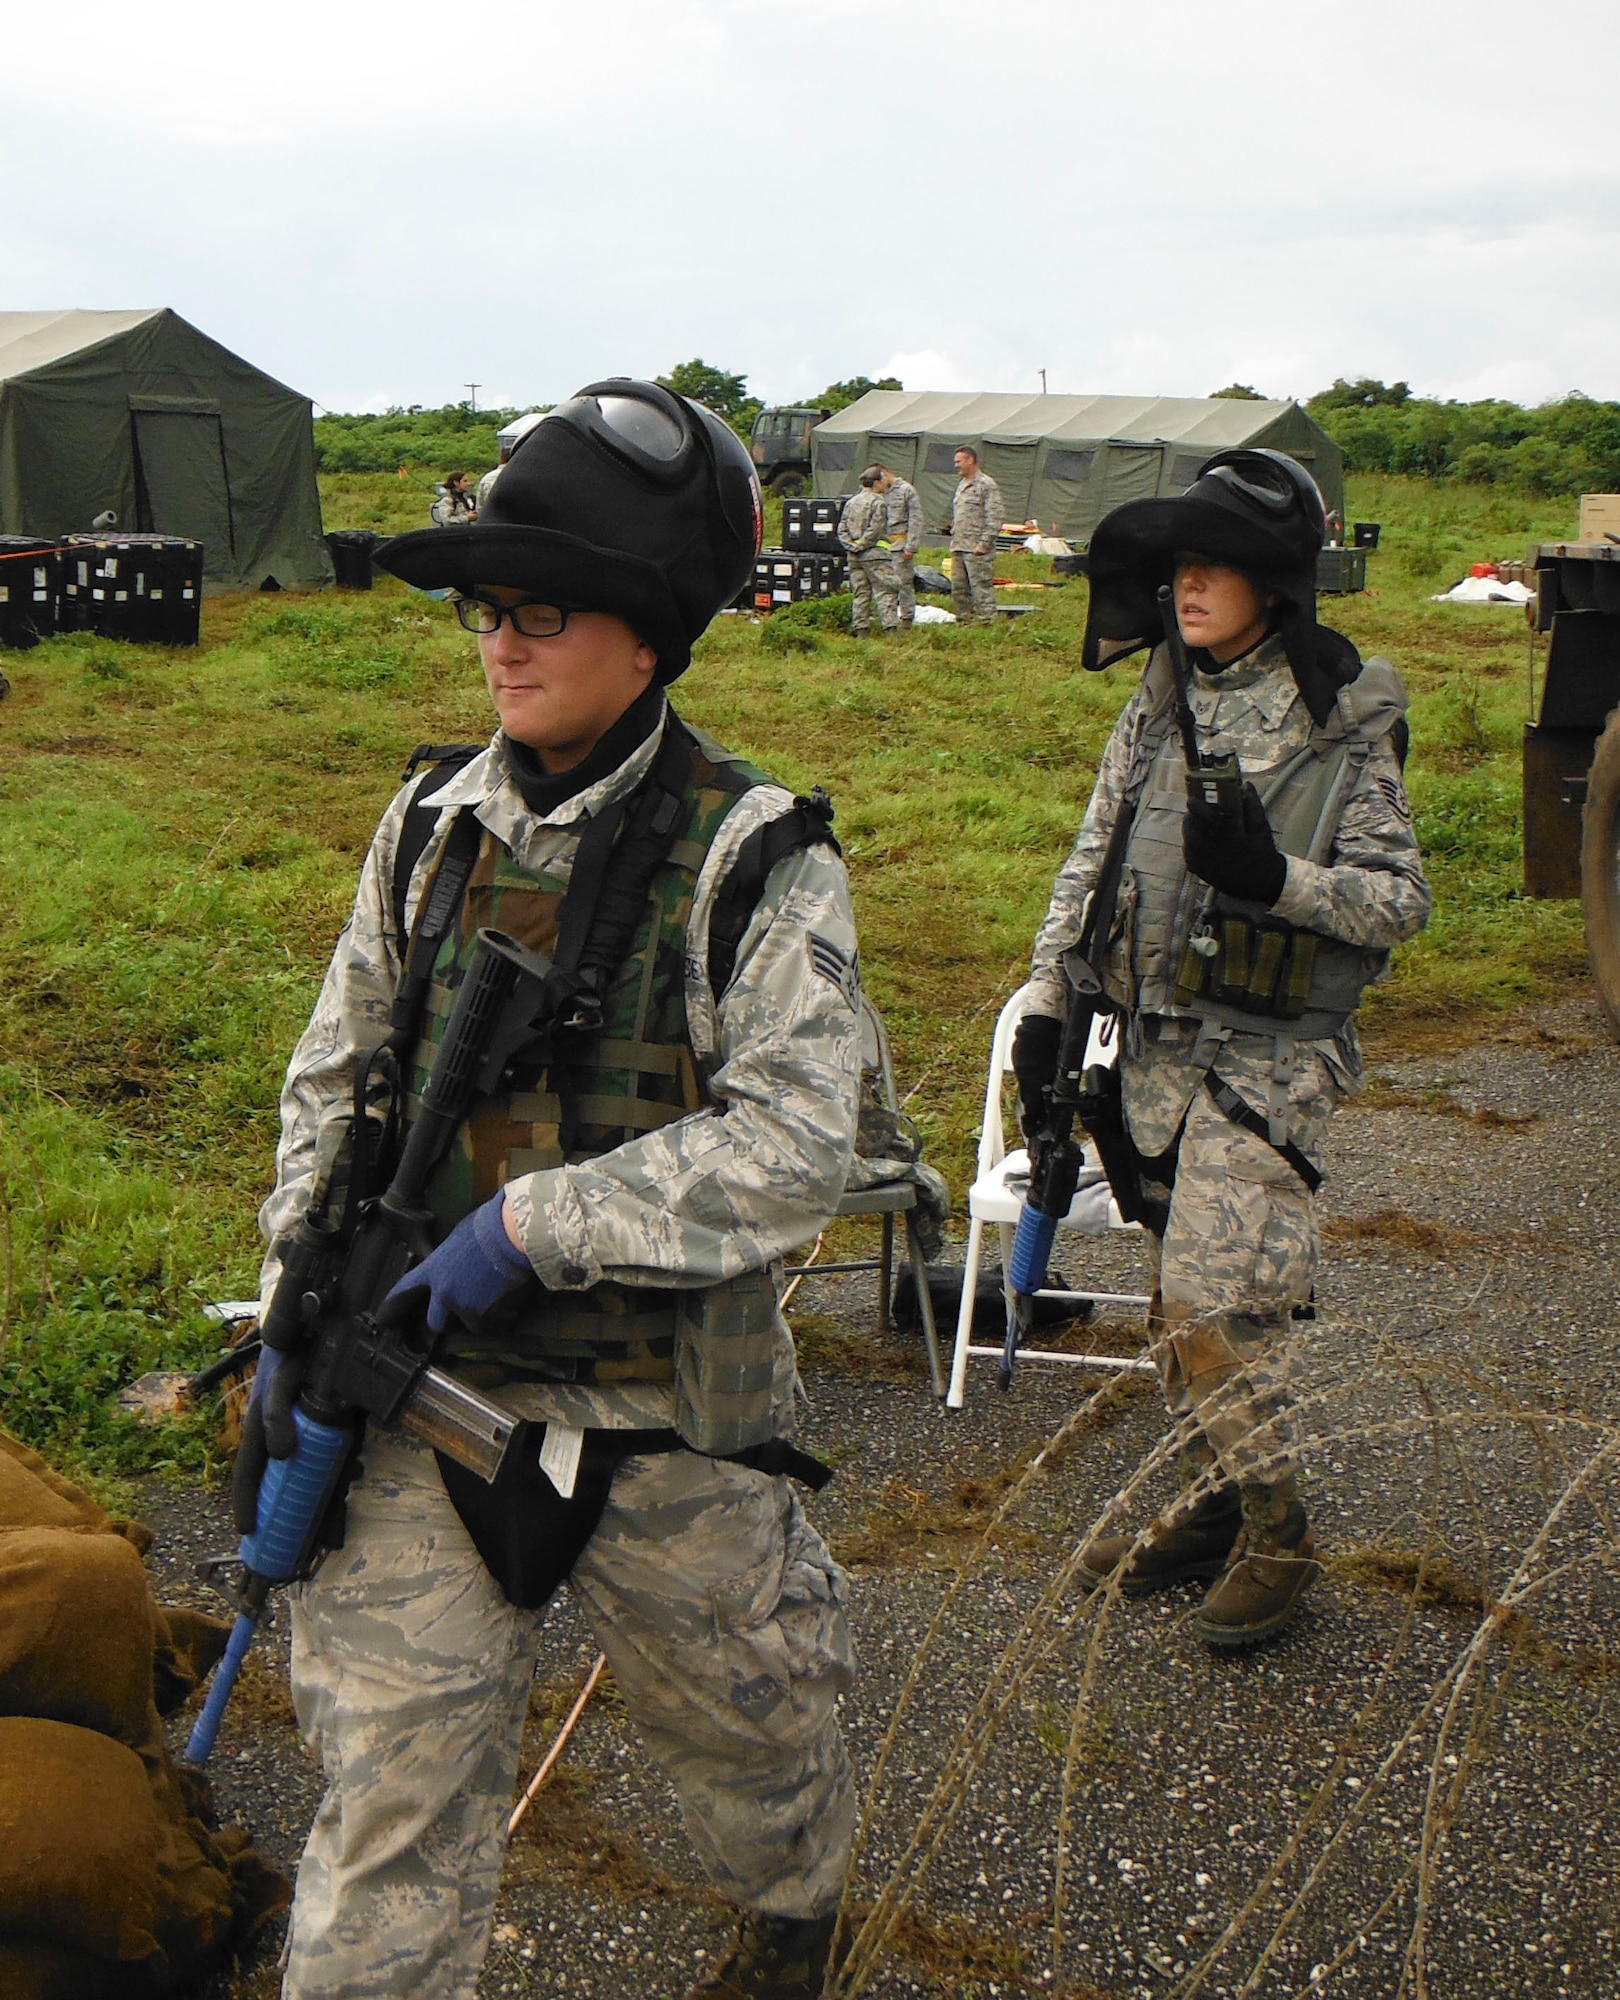 Senior Airman Joseph Wacaster and Staff Sgt. Kaitlyn Grotegut leave an entry control point to conduct a perimeter check during an exercise Oct. 28, 2014, at Andersen Air Force Base, Guam. The exercise allowed Airmen from the 644th CBCS to practice their abilities to respond to various scenarios during contingency operations. The Airmen are from the 644th Combat Communication Squadron. (Courtesy photo)